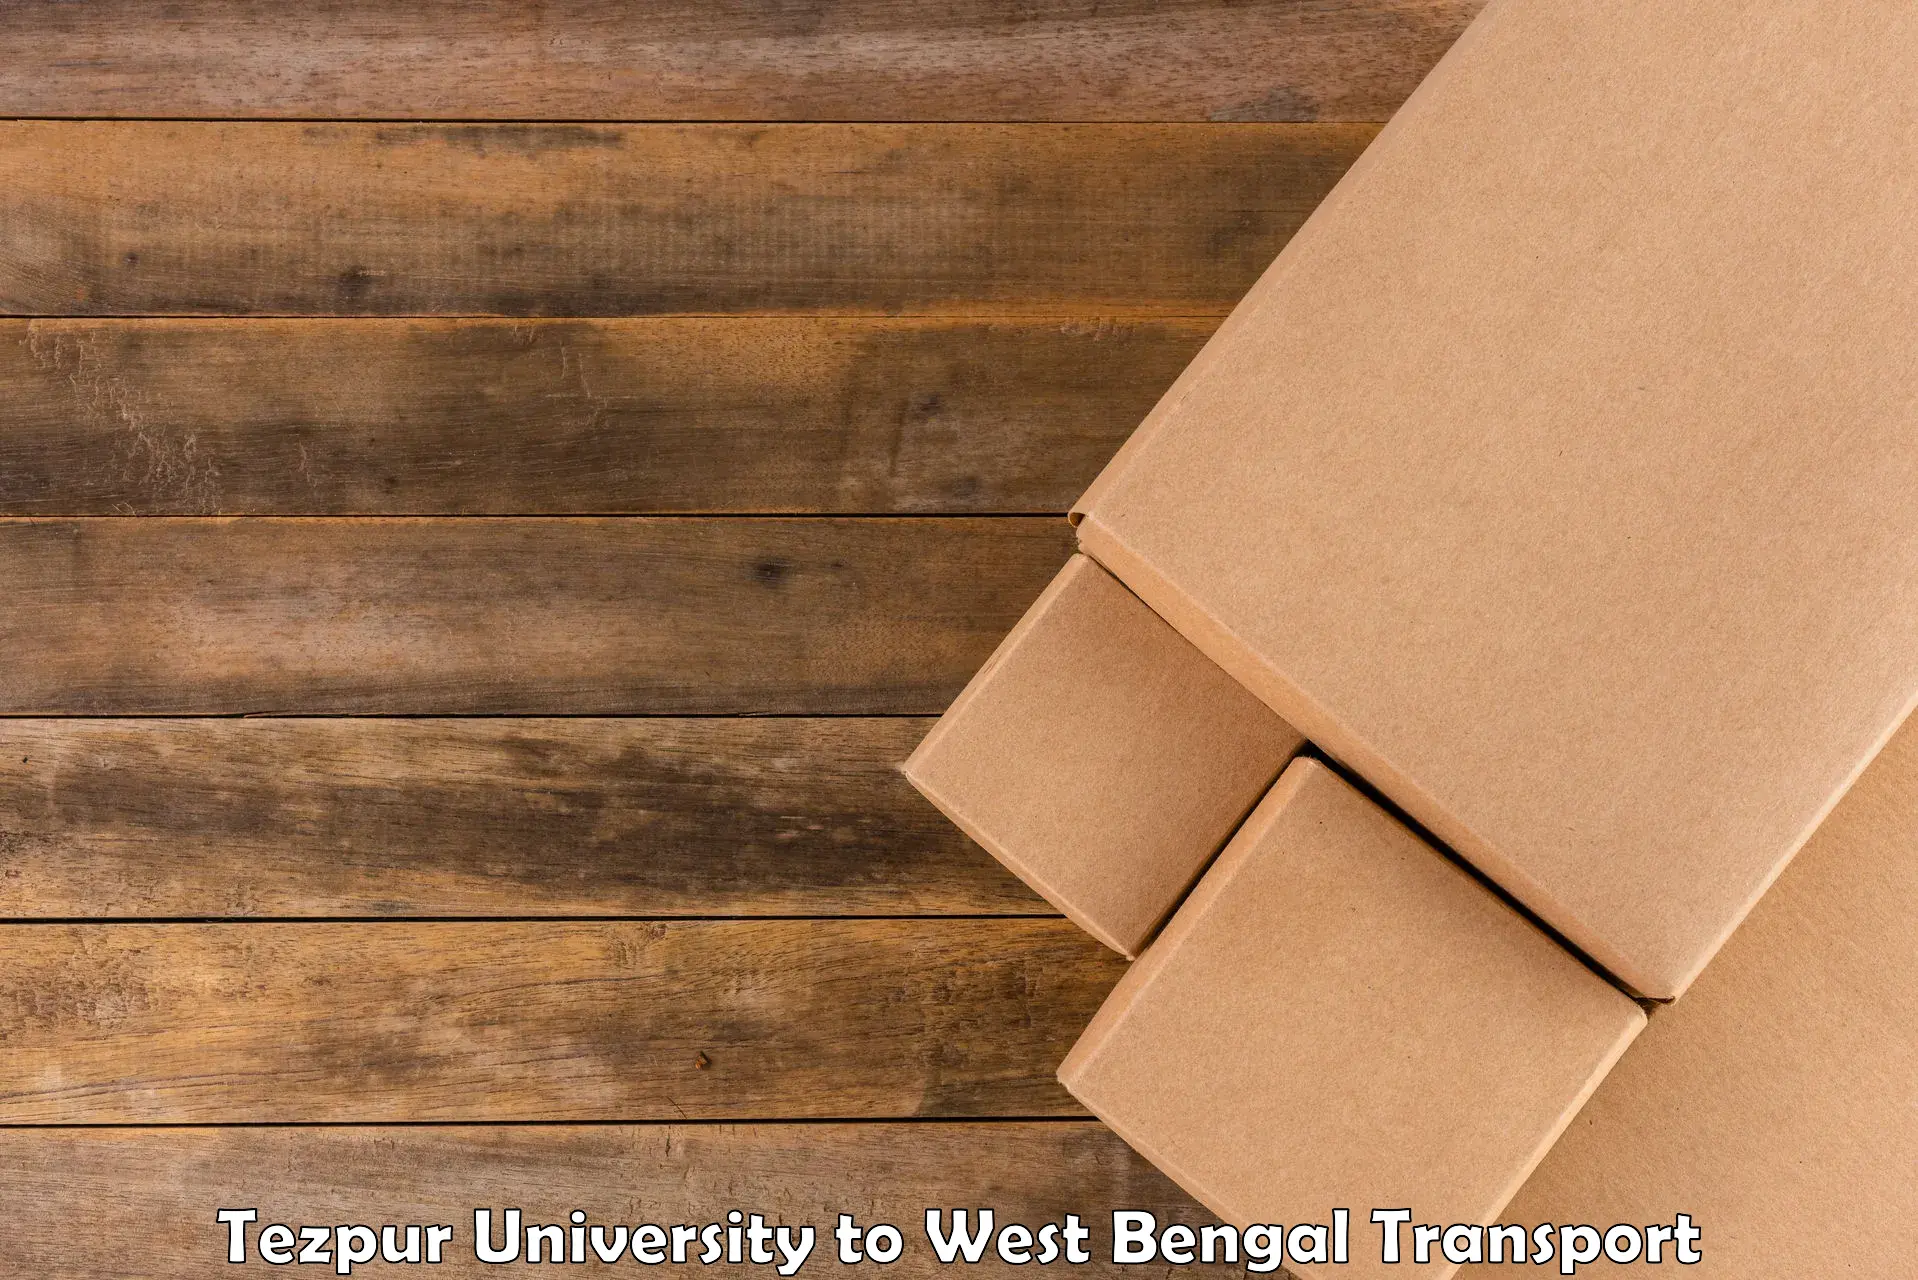 Nearby transport service Tezpur University to Hooghly